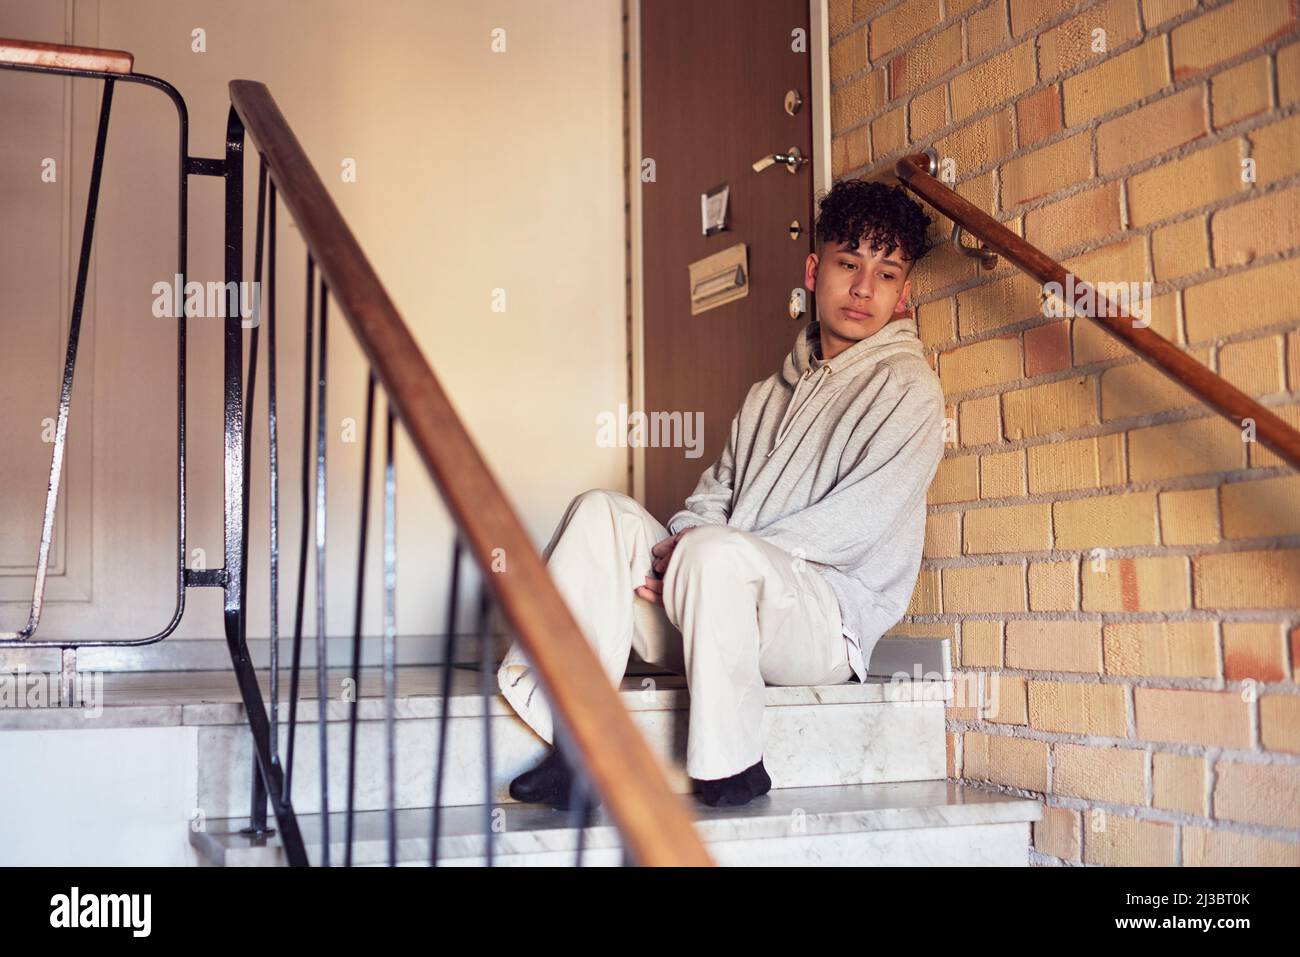 Boy sitting on stairs and leaning against wall Stock Photo